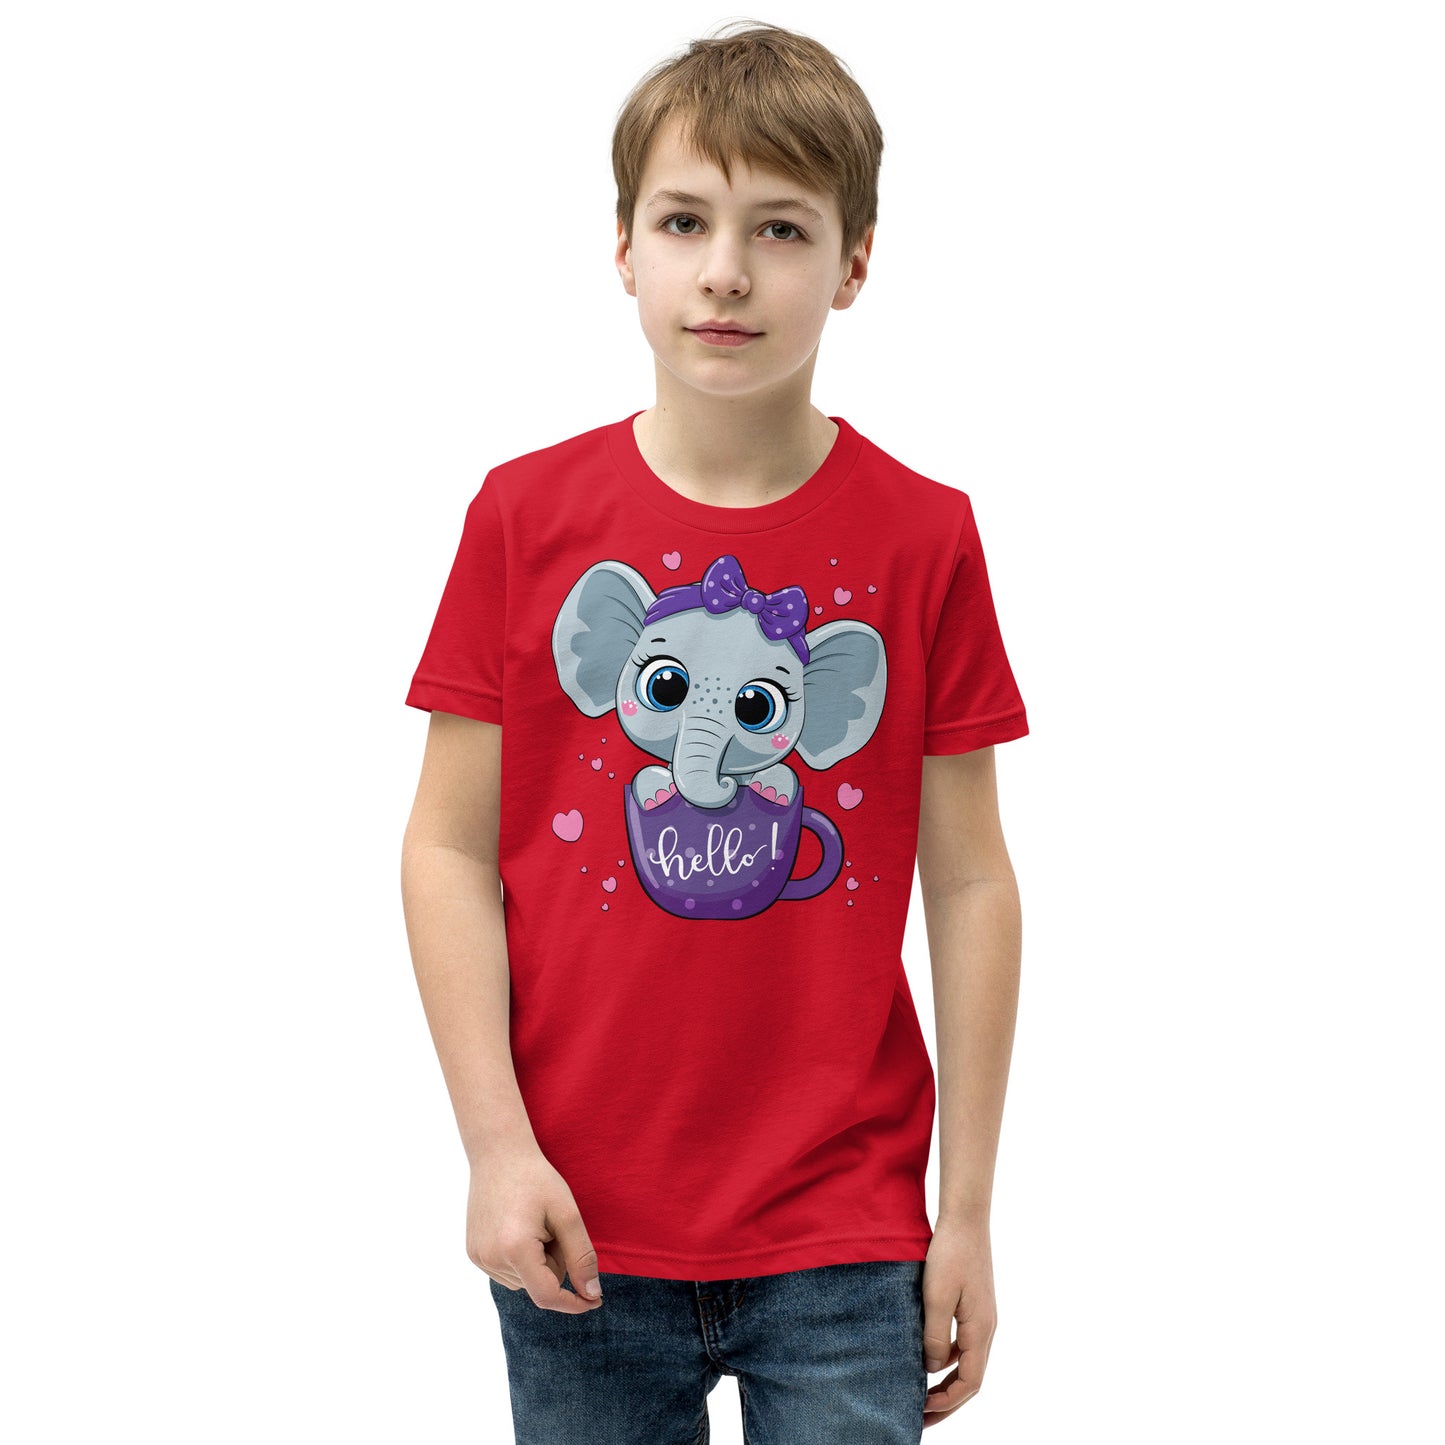 Baby Elephant inside Cup T-shirt, No. 0047